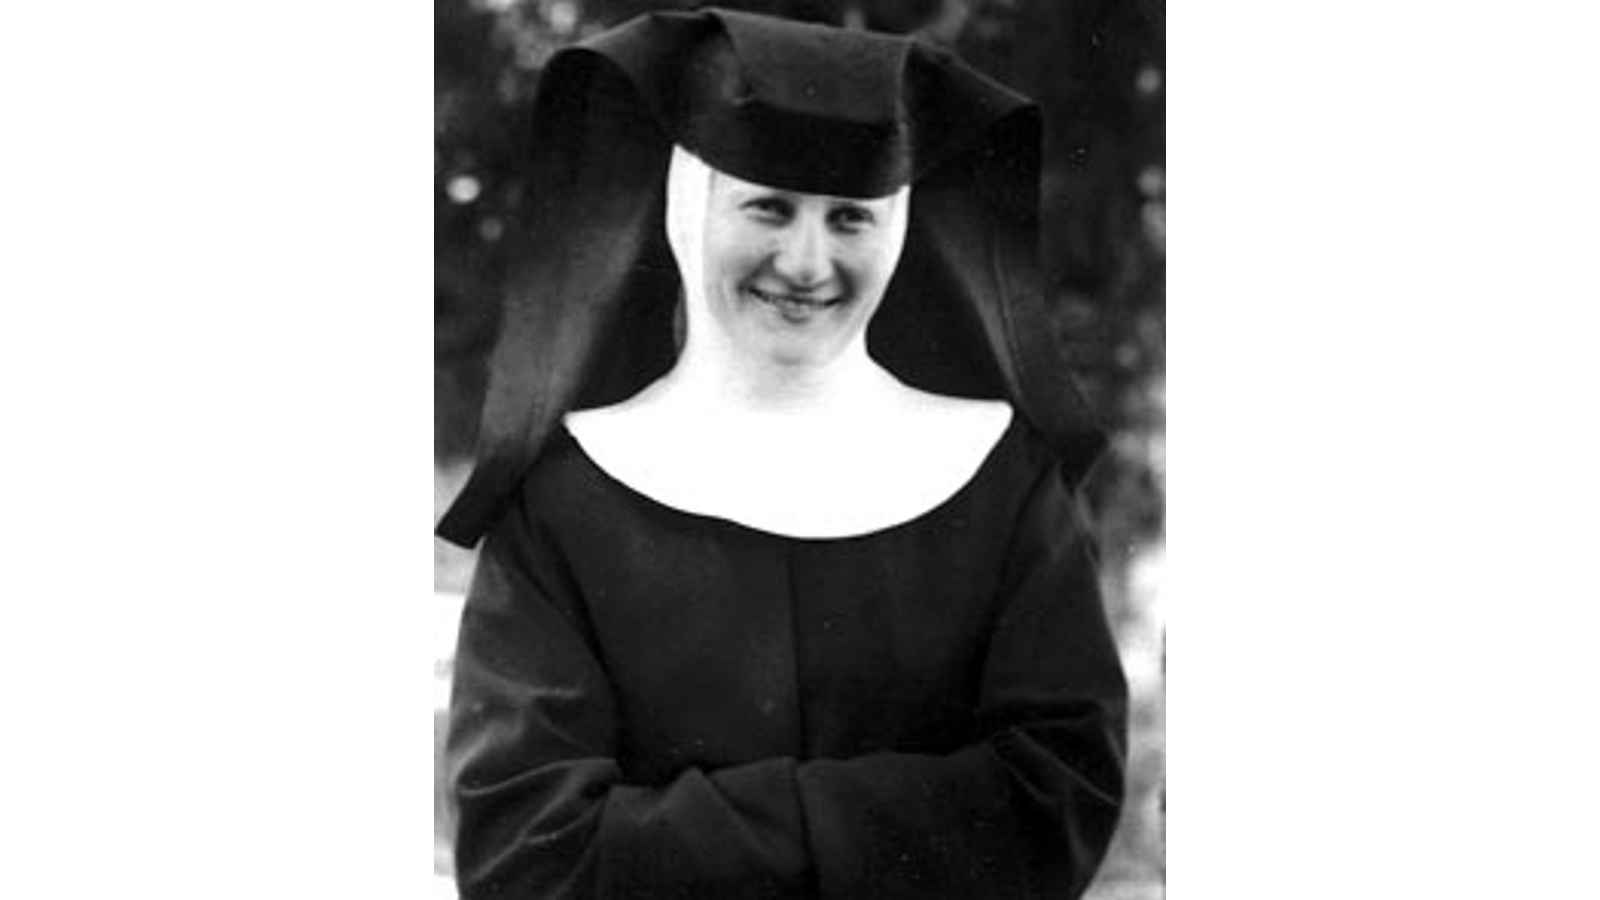 Sister Maria Hummel Day 2023: Date, History, Facts about Sister Maria Hummel